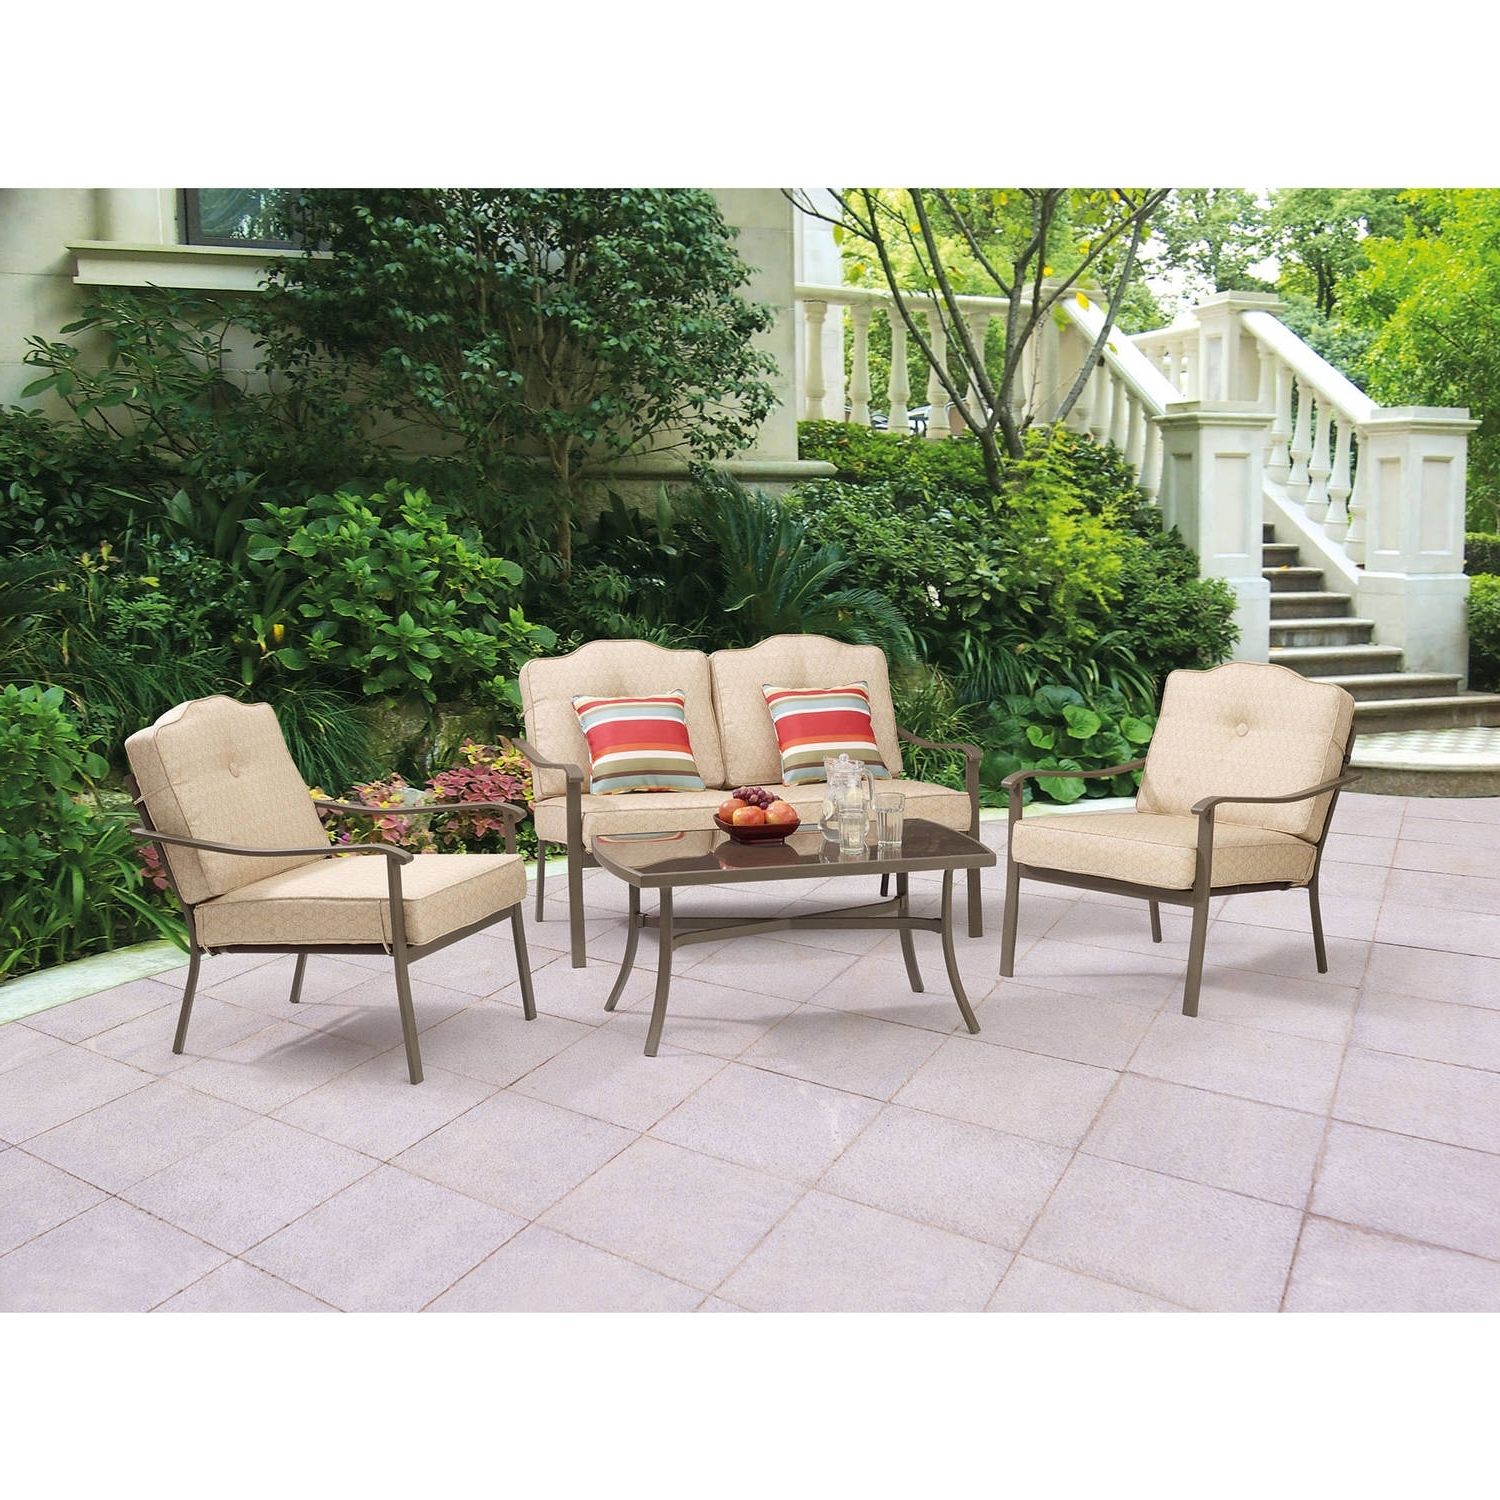 Featured Photo of Top 15 of Patio Conversation Sets at Walmart